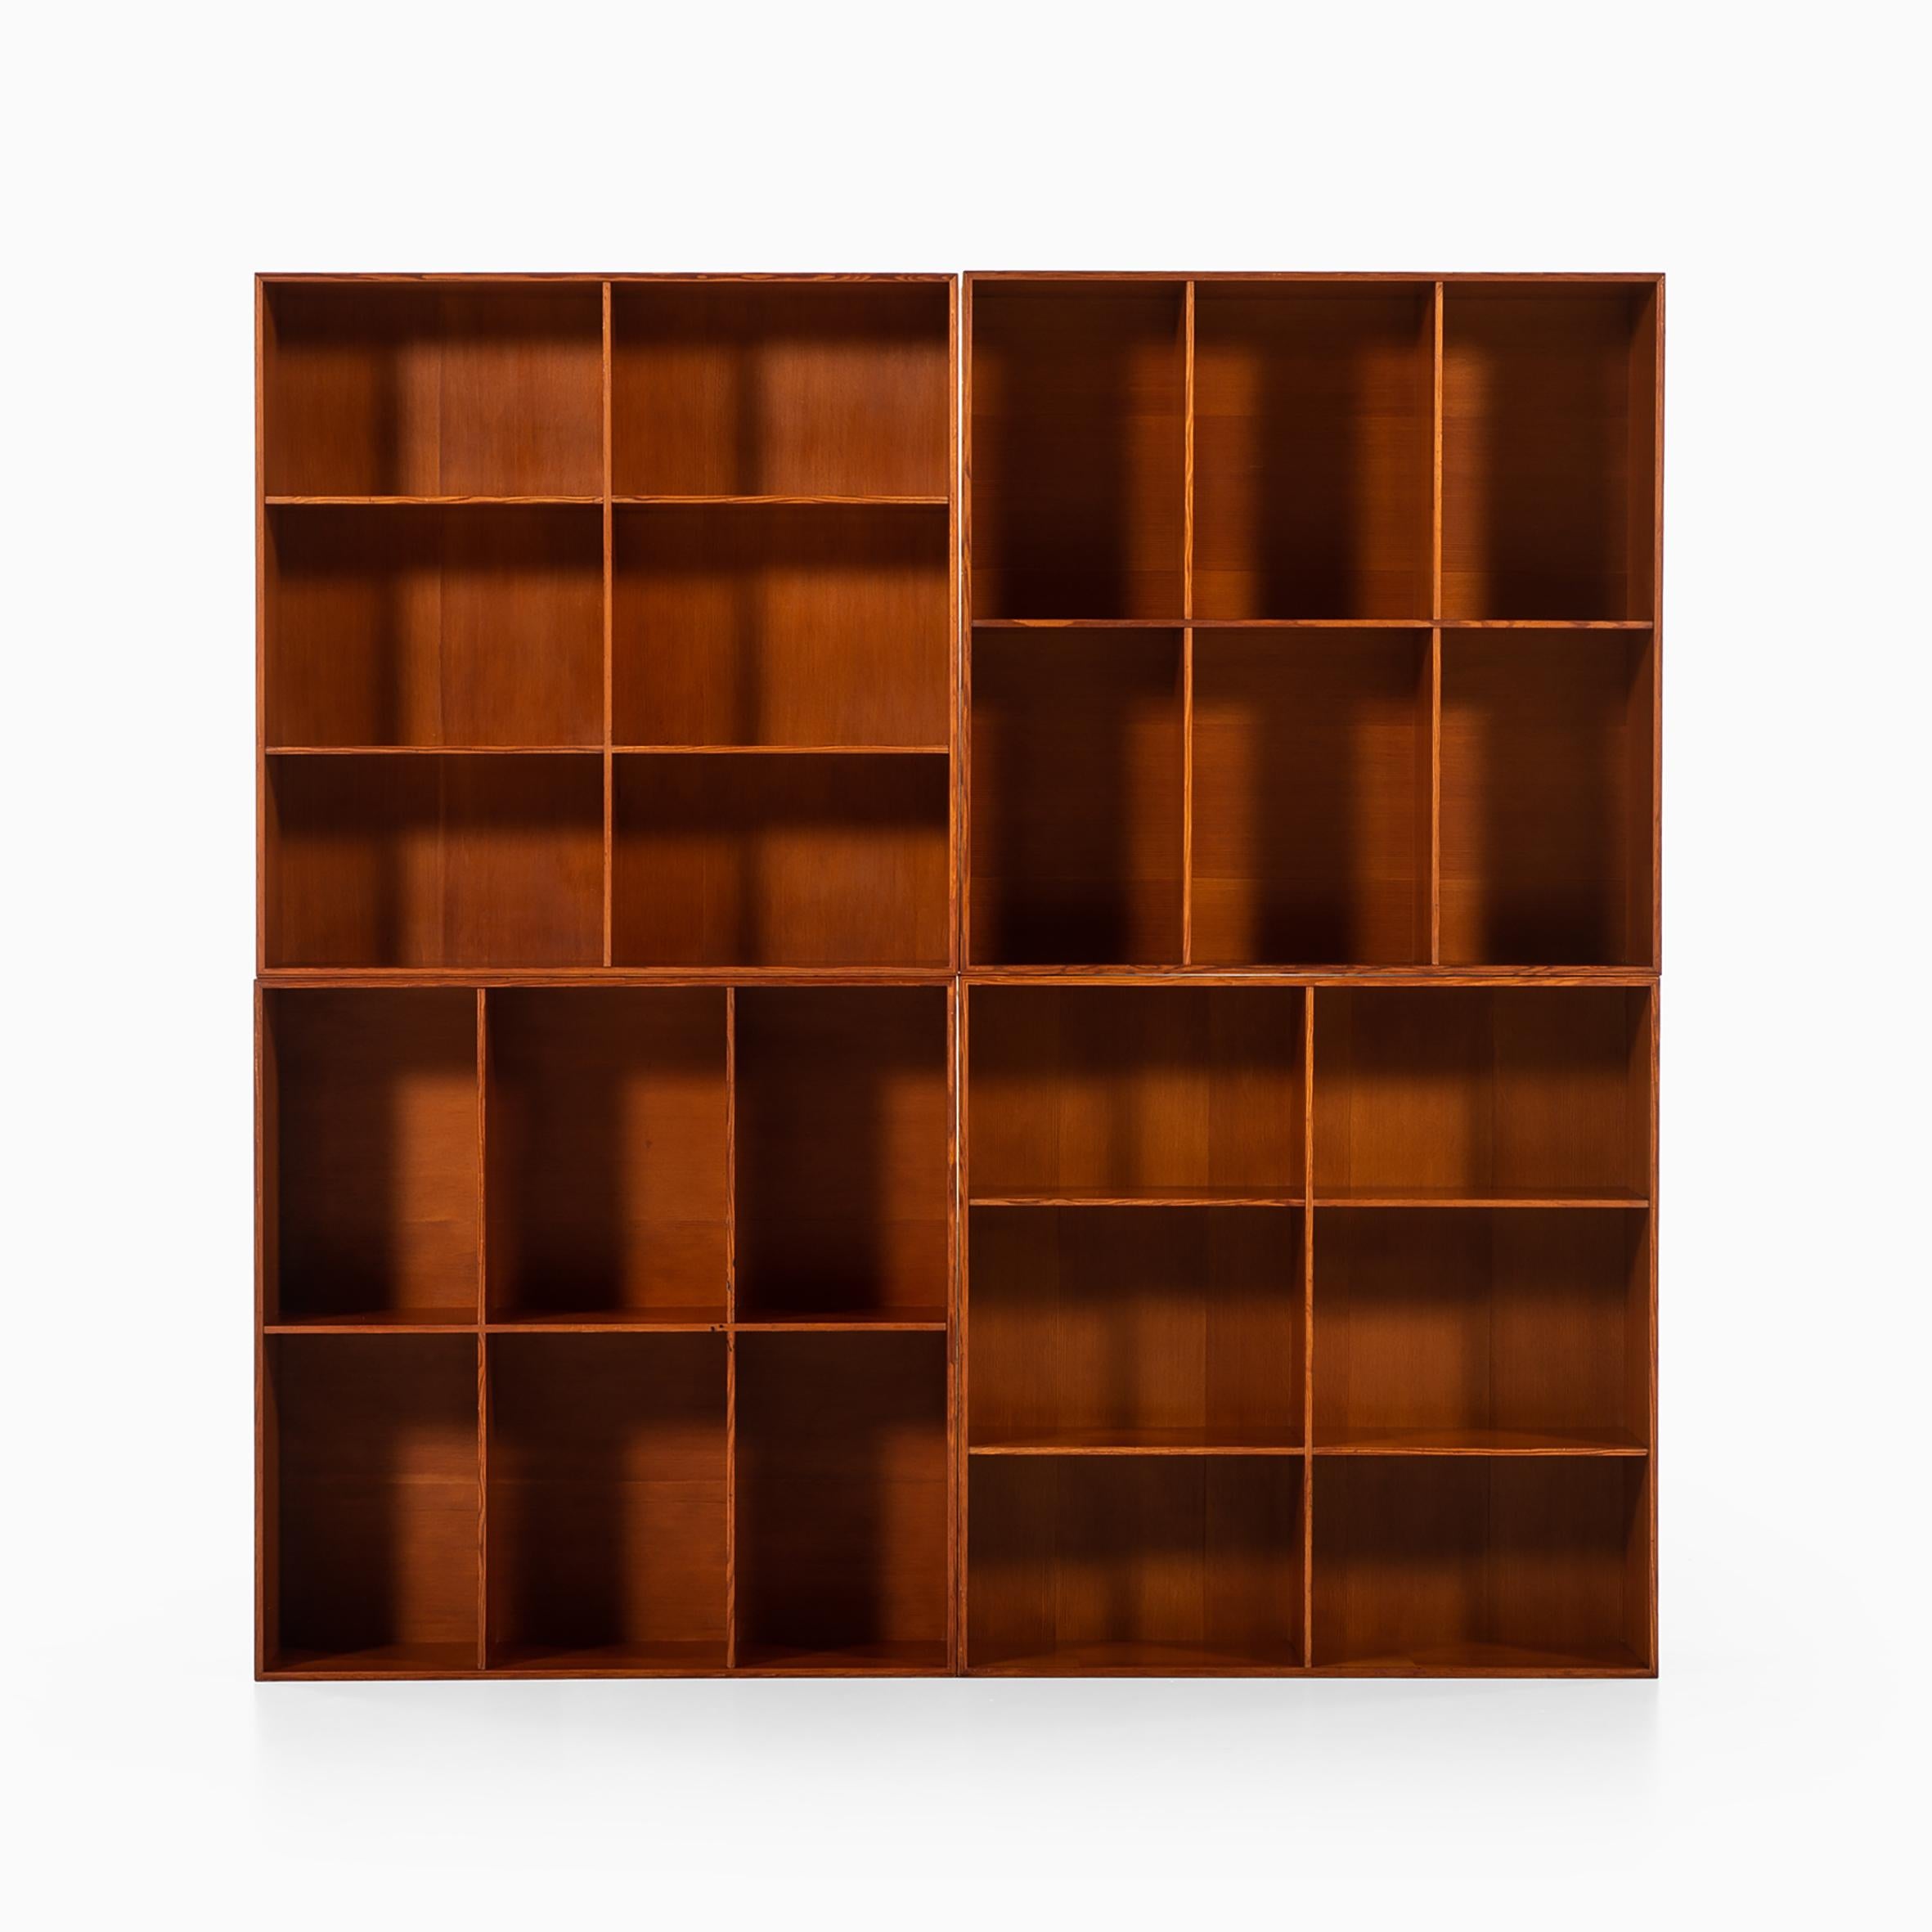 Mogens Koch

Four bookcases

Four square Oregon pine bookcases each with six rectangular cases.
Labeled on the back « Rud.Rasmussens, Snedkerier, 45 Nørrebrogade, København, 22860 ».
Produced by Rud Rasmussen.
Denmark.
Circa